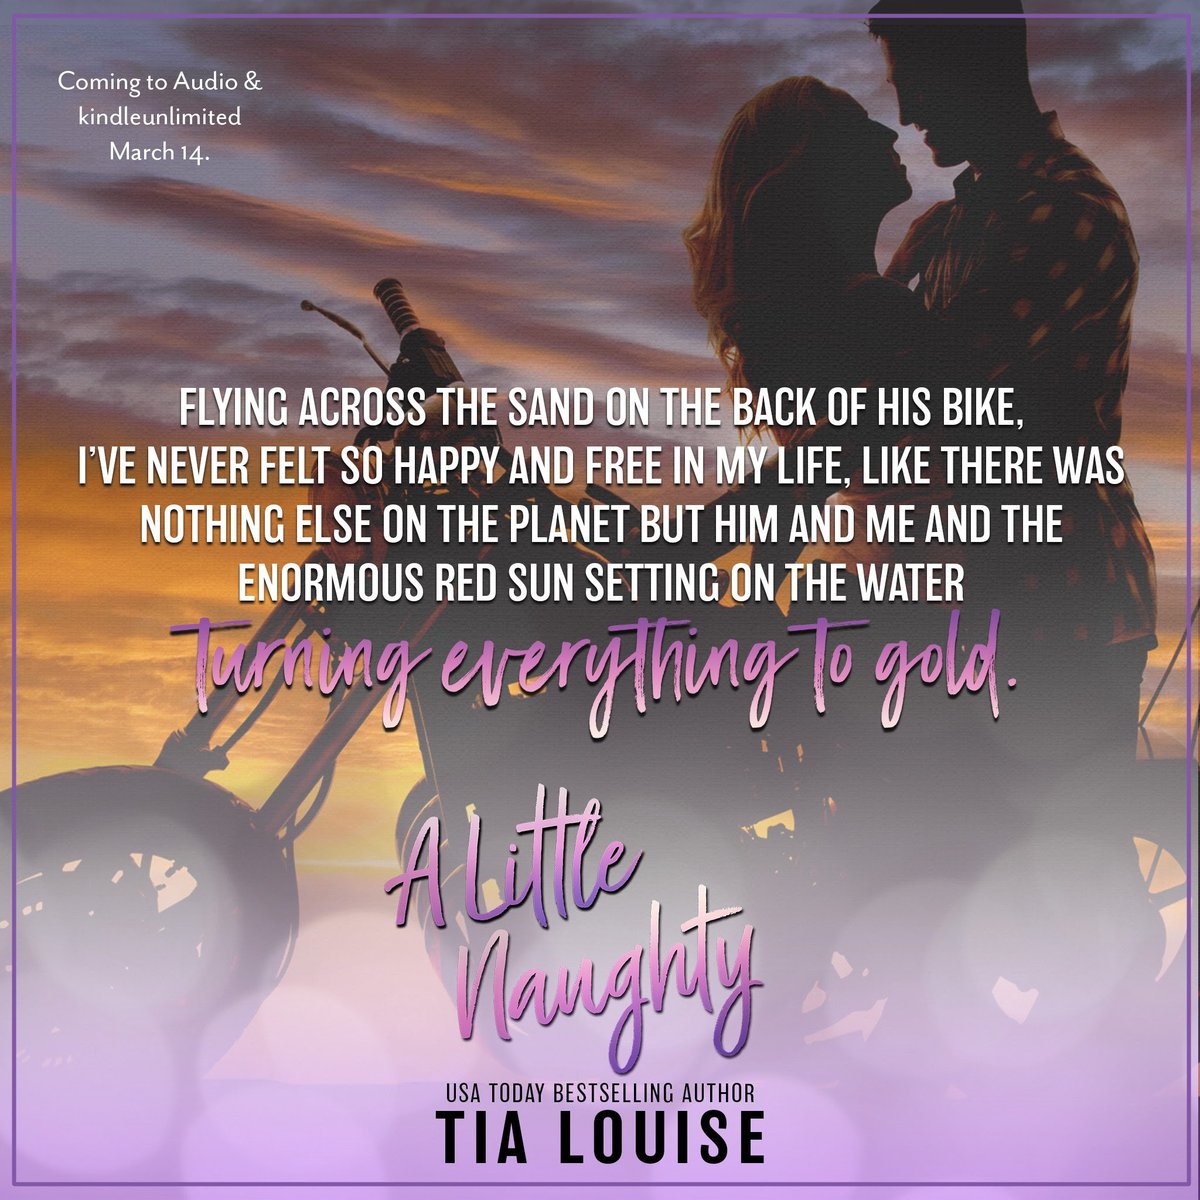 ✨TEASER: A LITTLE NAUGHTY by @AuthorTLouise is coming March 14!

#PreOrderHere
geni.us/ALNamz

#bookteaser #tialouise #kindleunlimited #hefallsfirst #marriageofconvenience #oppositesattract #bookaholic #smalltownromance #newbookalert